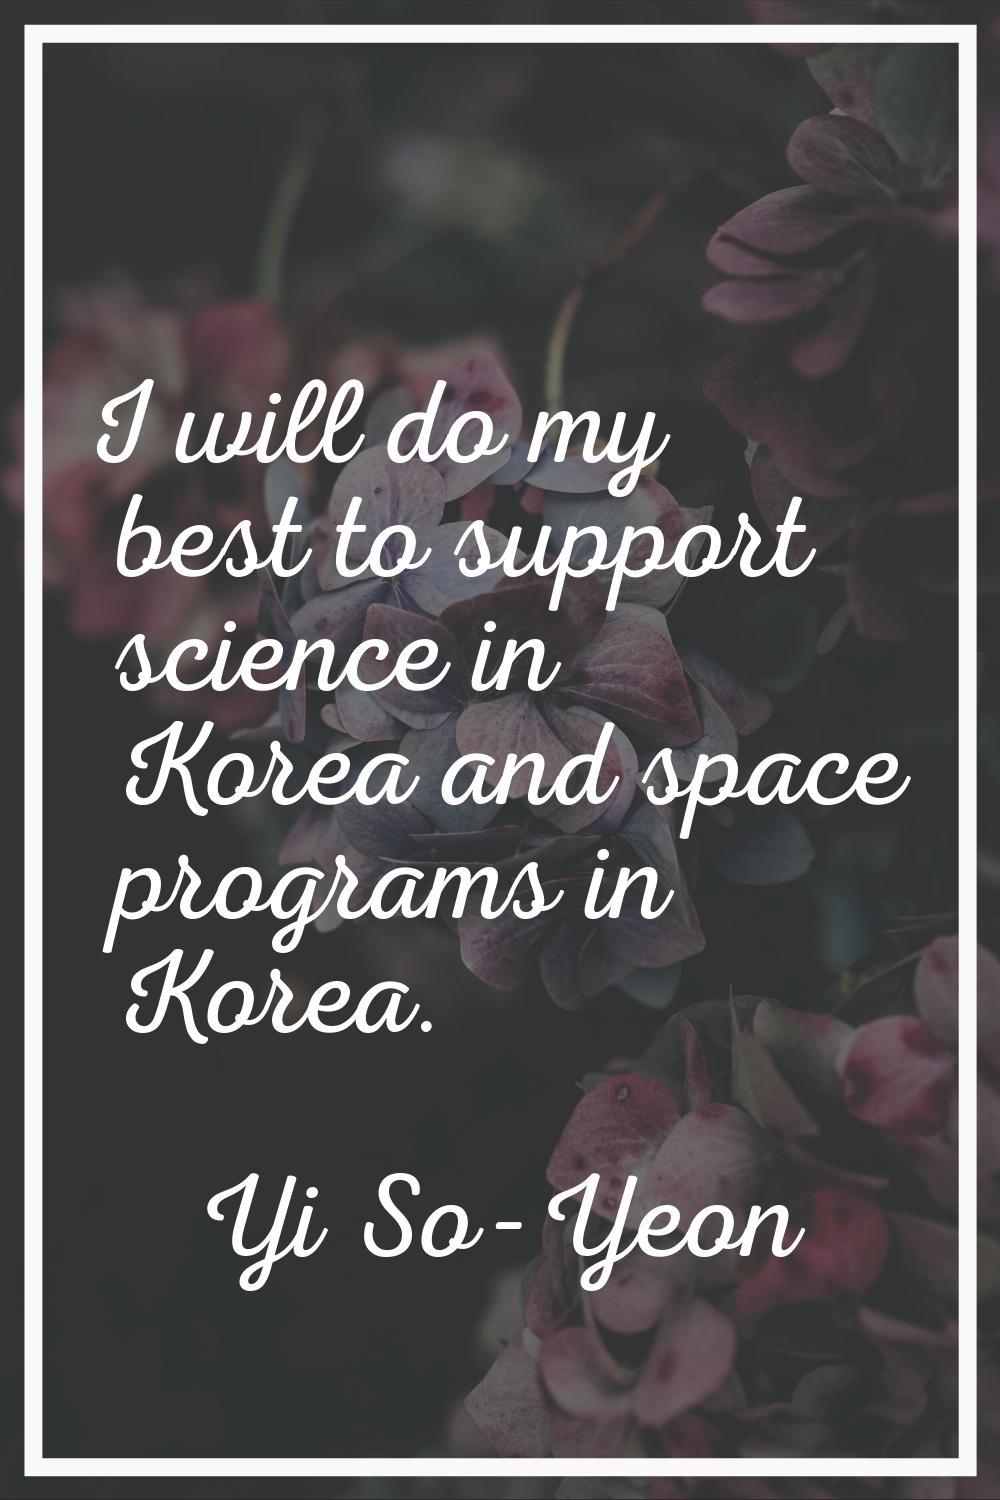 I will do my best to support science in Korea and space programs in Korea.